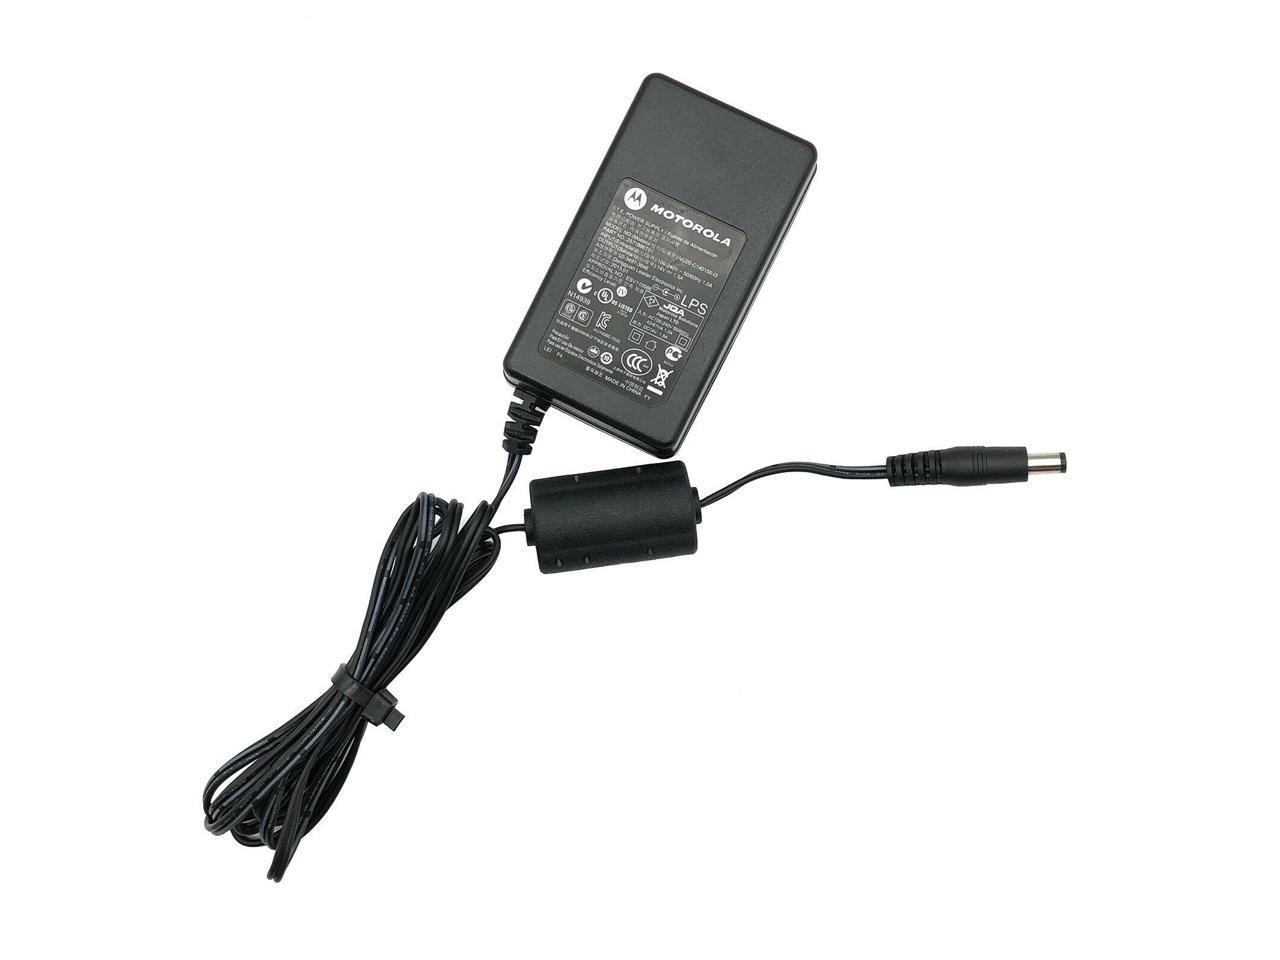 Motorola Nrn7093a AC Adapter/power Supply for Keynote Charger Base for sale online 